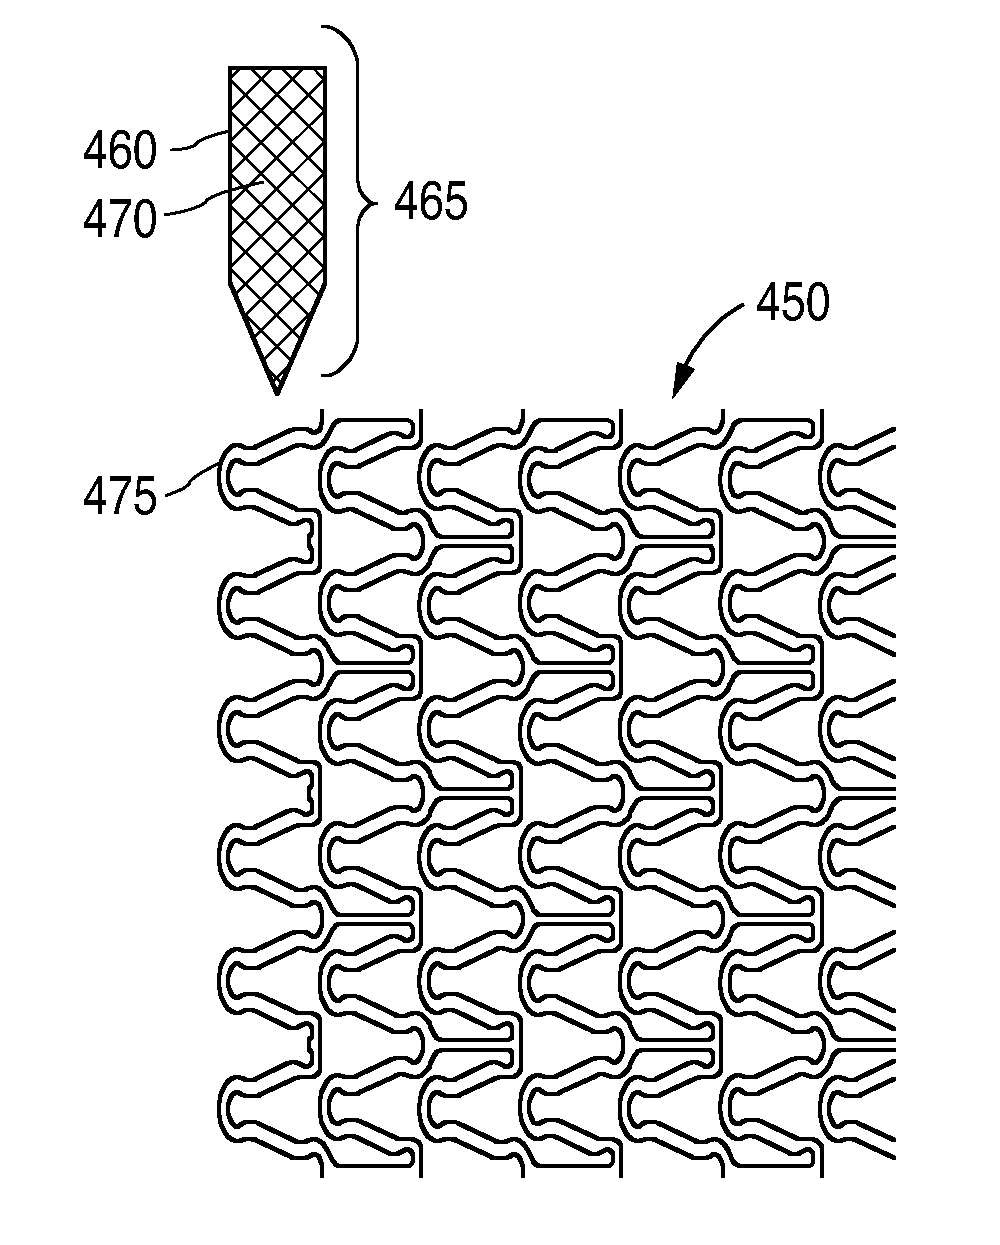 Medical Device with Regioselective Structure-Property Distribution